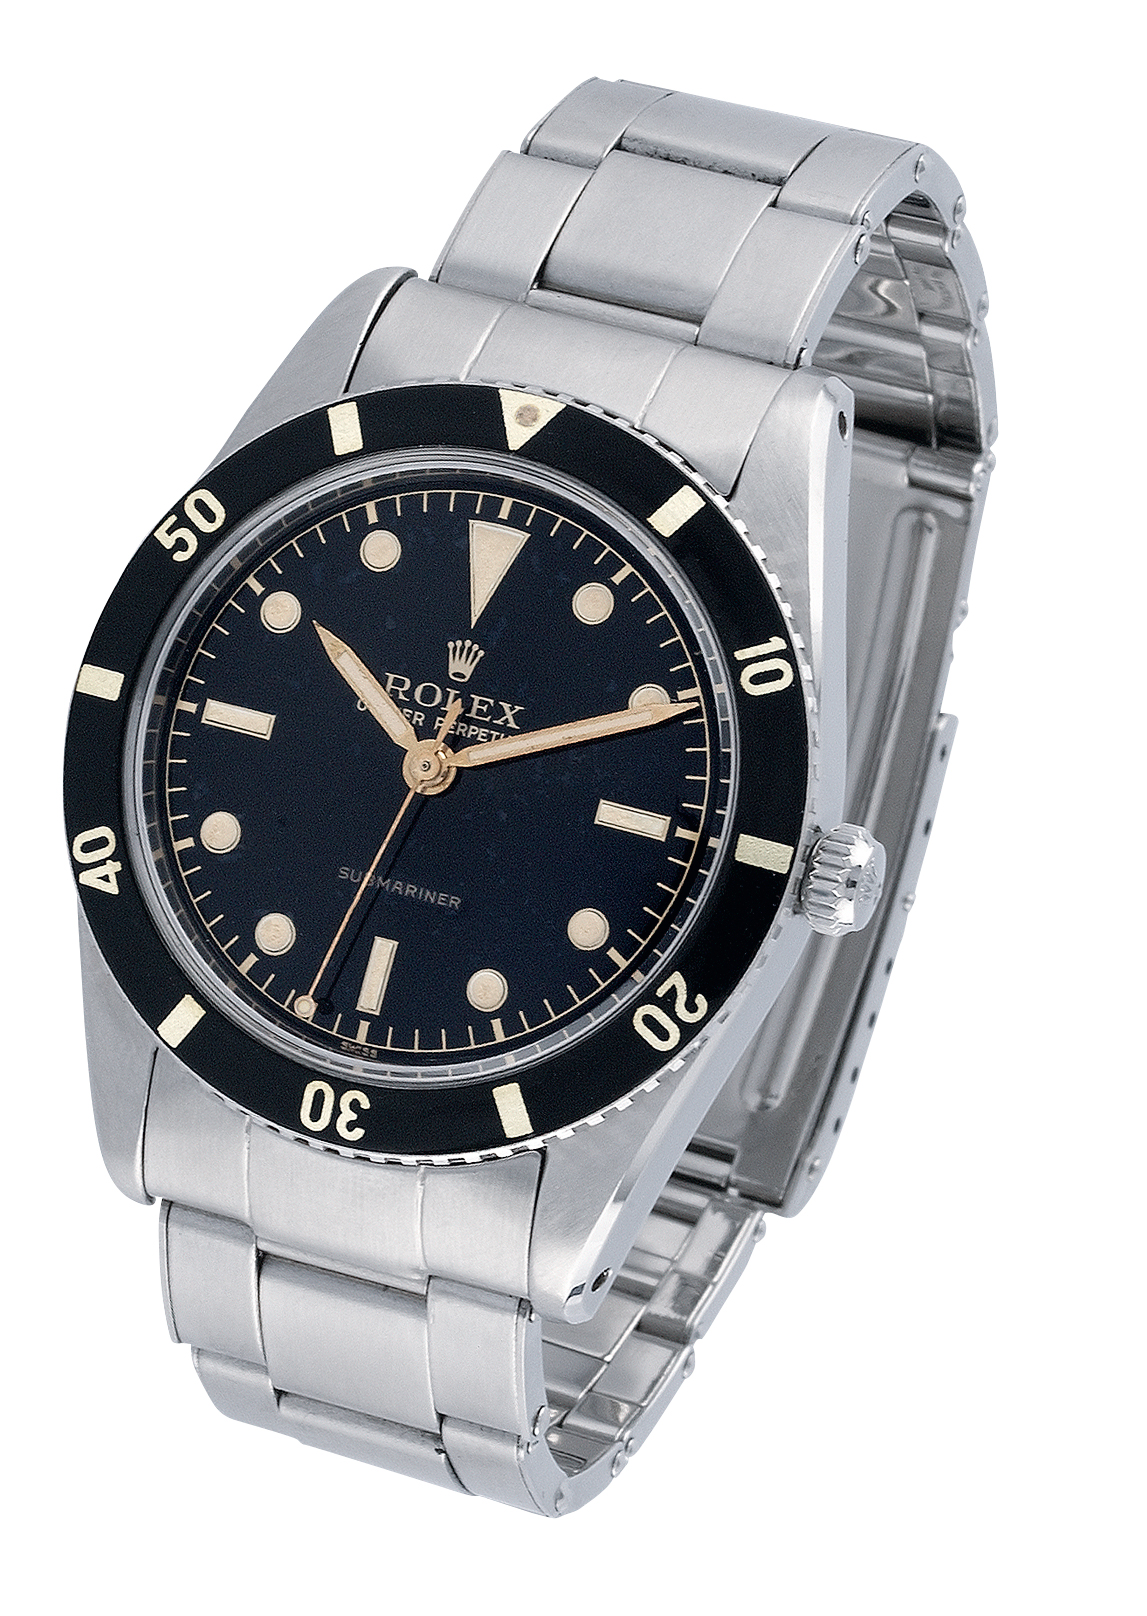 Hardly any model has influenced the watch world as strongly – and has been copied as often – as Rolex’s Submariner. Its debut in 1953 inaugurated the era of round, watertight, sporty, self-winding watches.